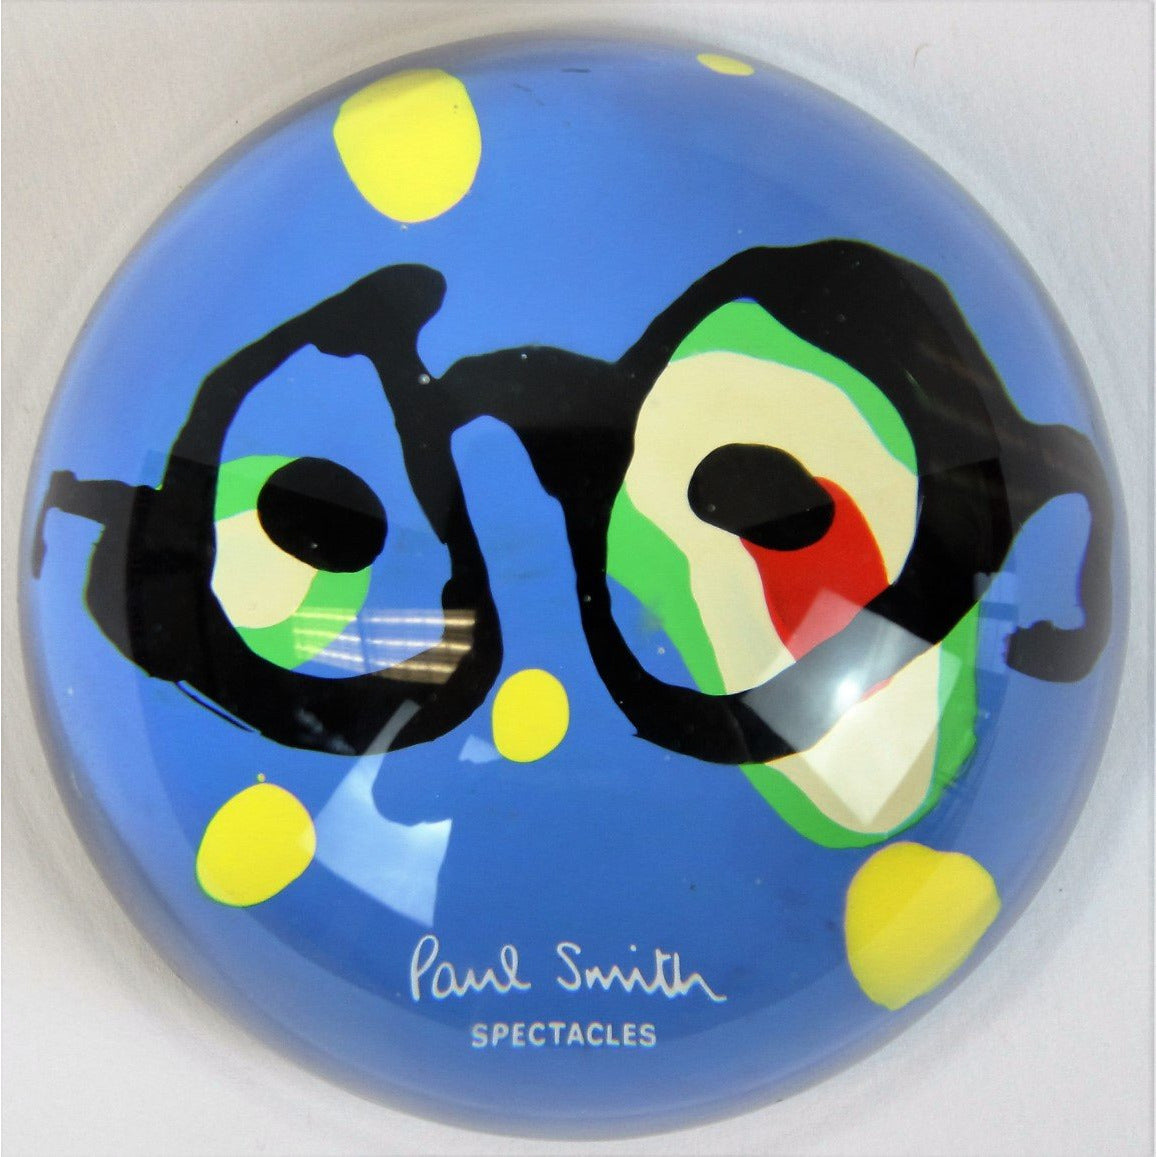 Paul Smith 'Spectacles' Glass Paperweight